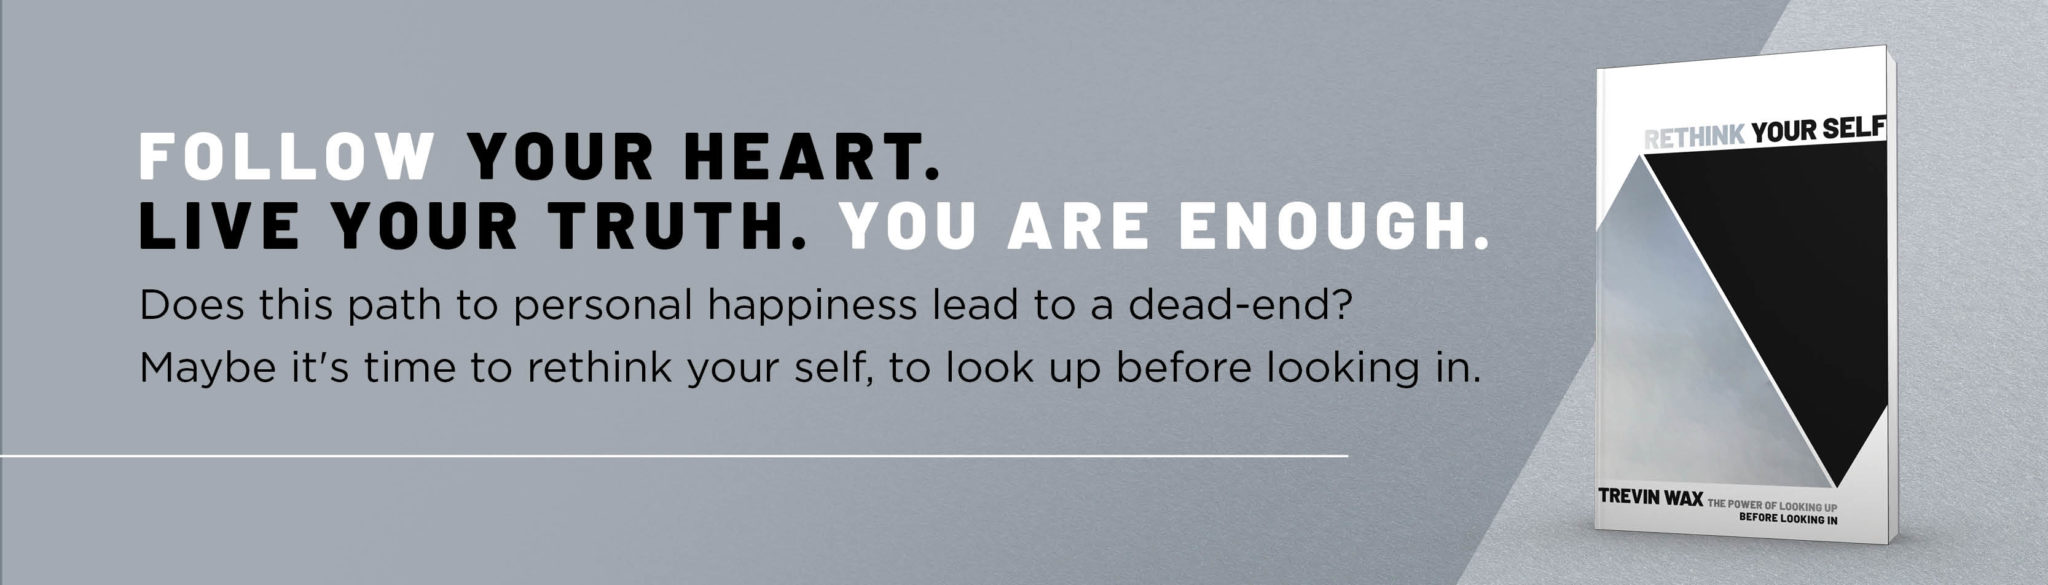 Follow your heart. Live your truth. You are enough. Does this path to personal happiness lead to a dead-end? Maybe it's time to rethink your self, to look up before looking in.